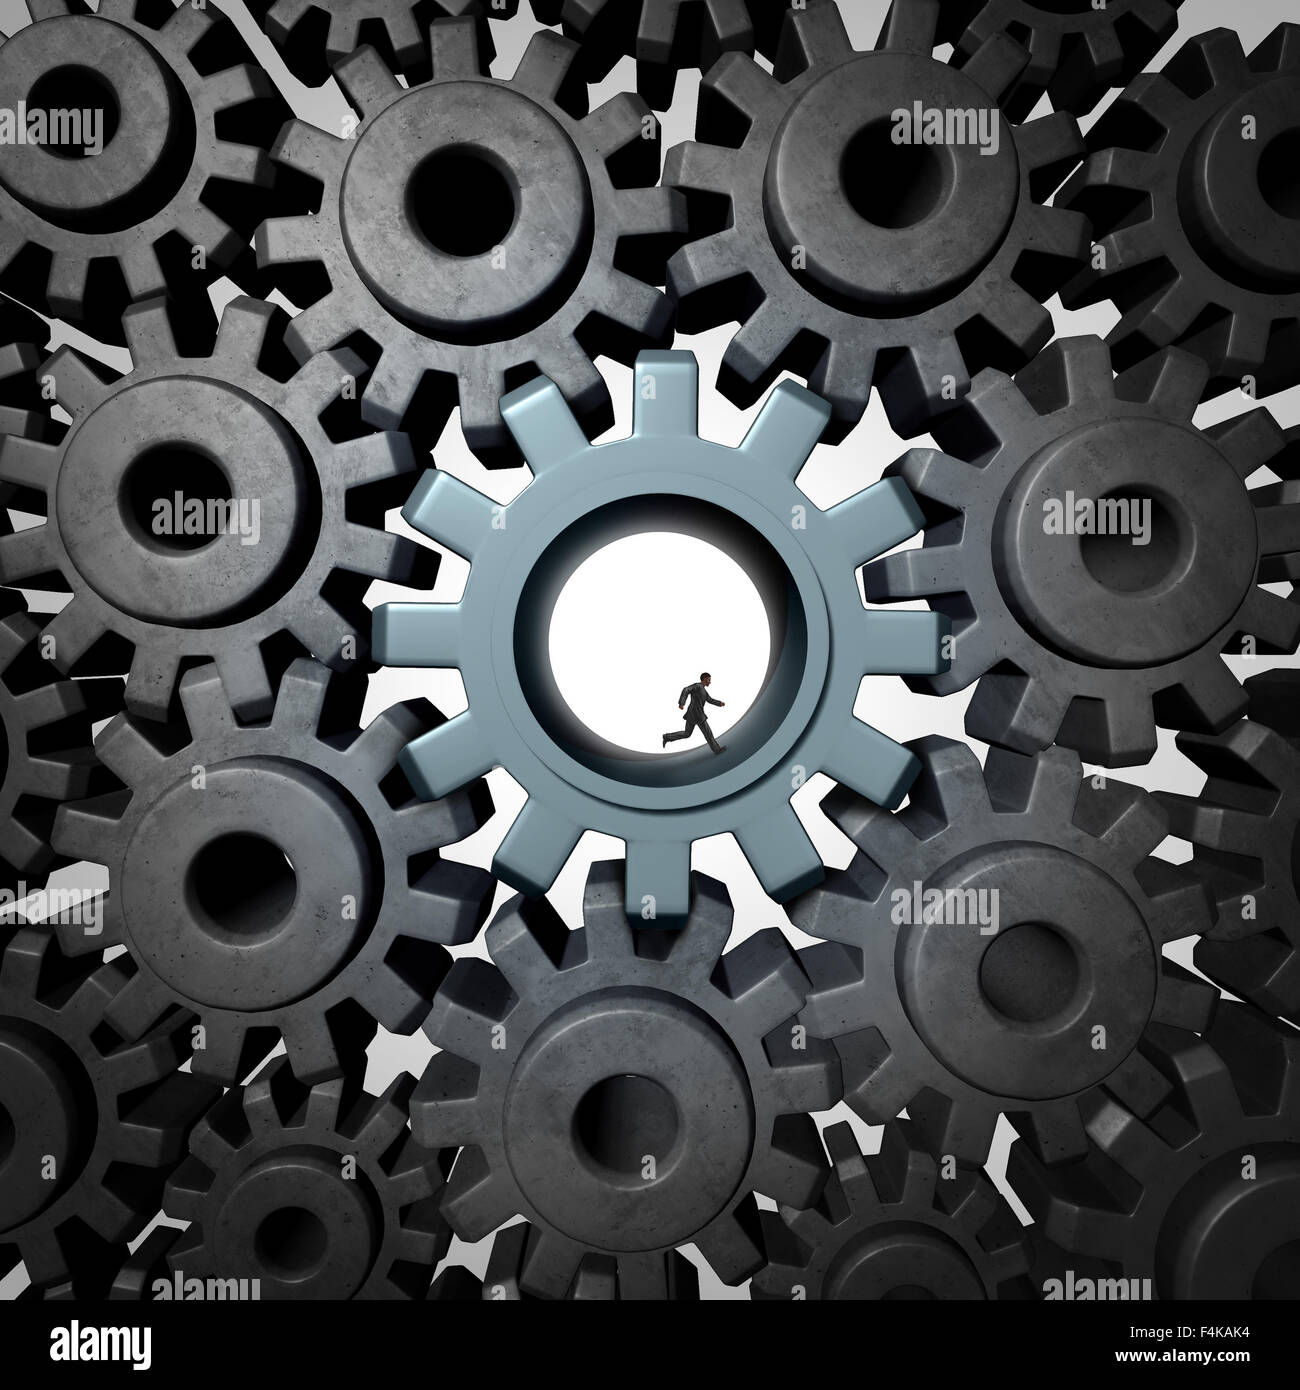 Businessman gear run concept as giant gears or cog wheels inside a network of machine parts being moved by a small person as a financial concept for economic engine or overworked essential employee productivity. Stock Photo